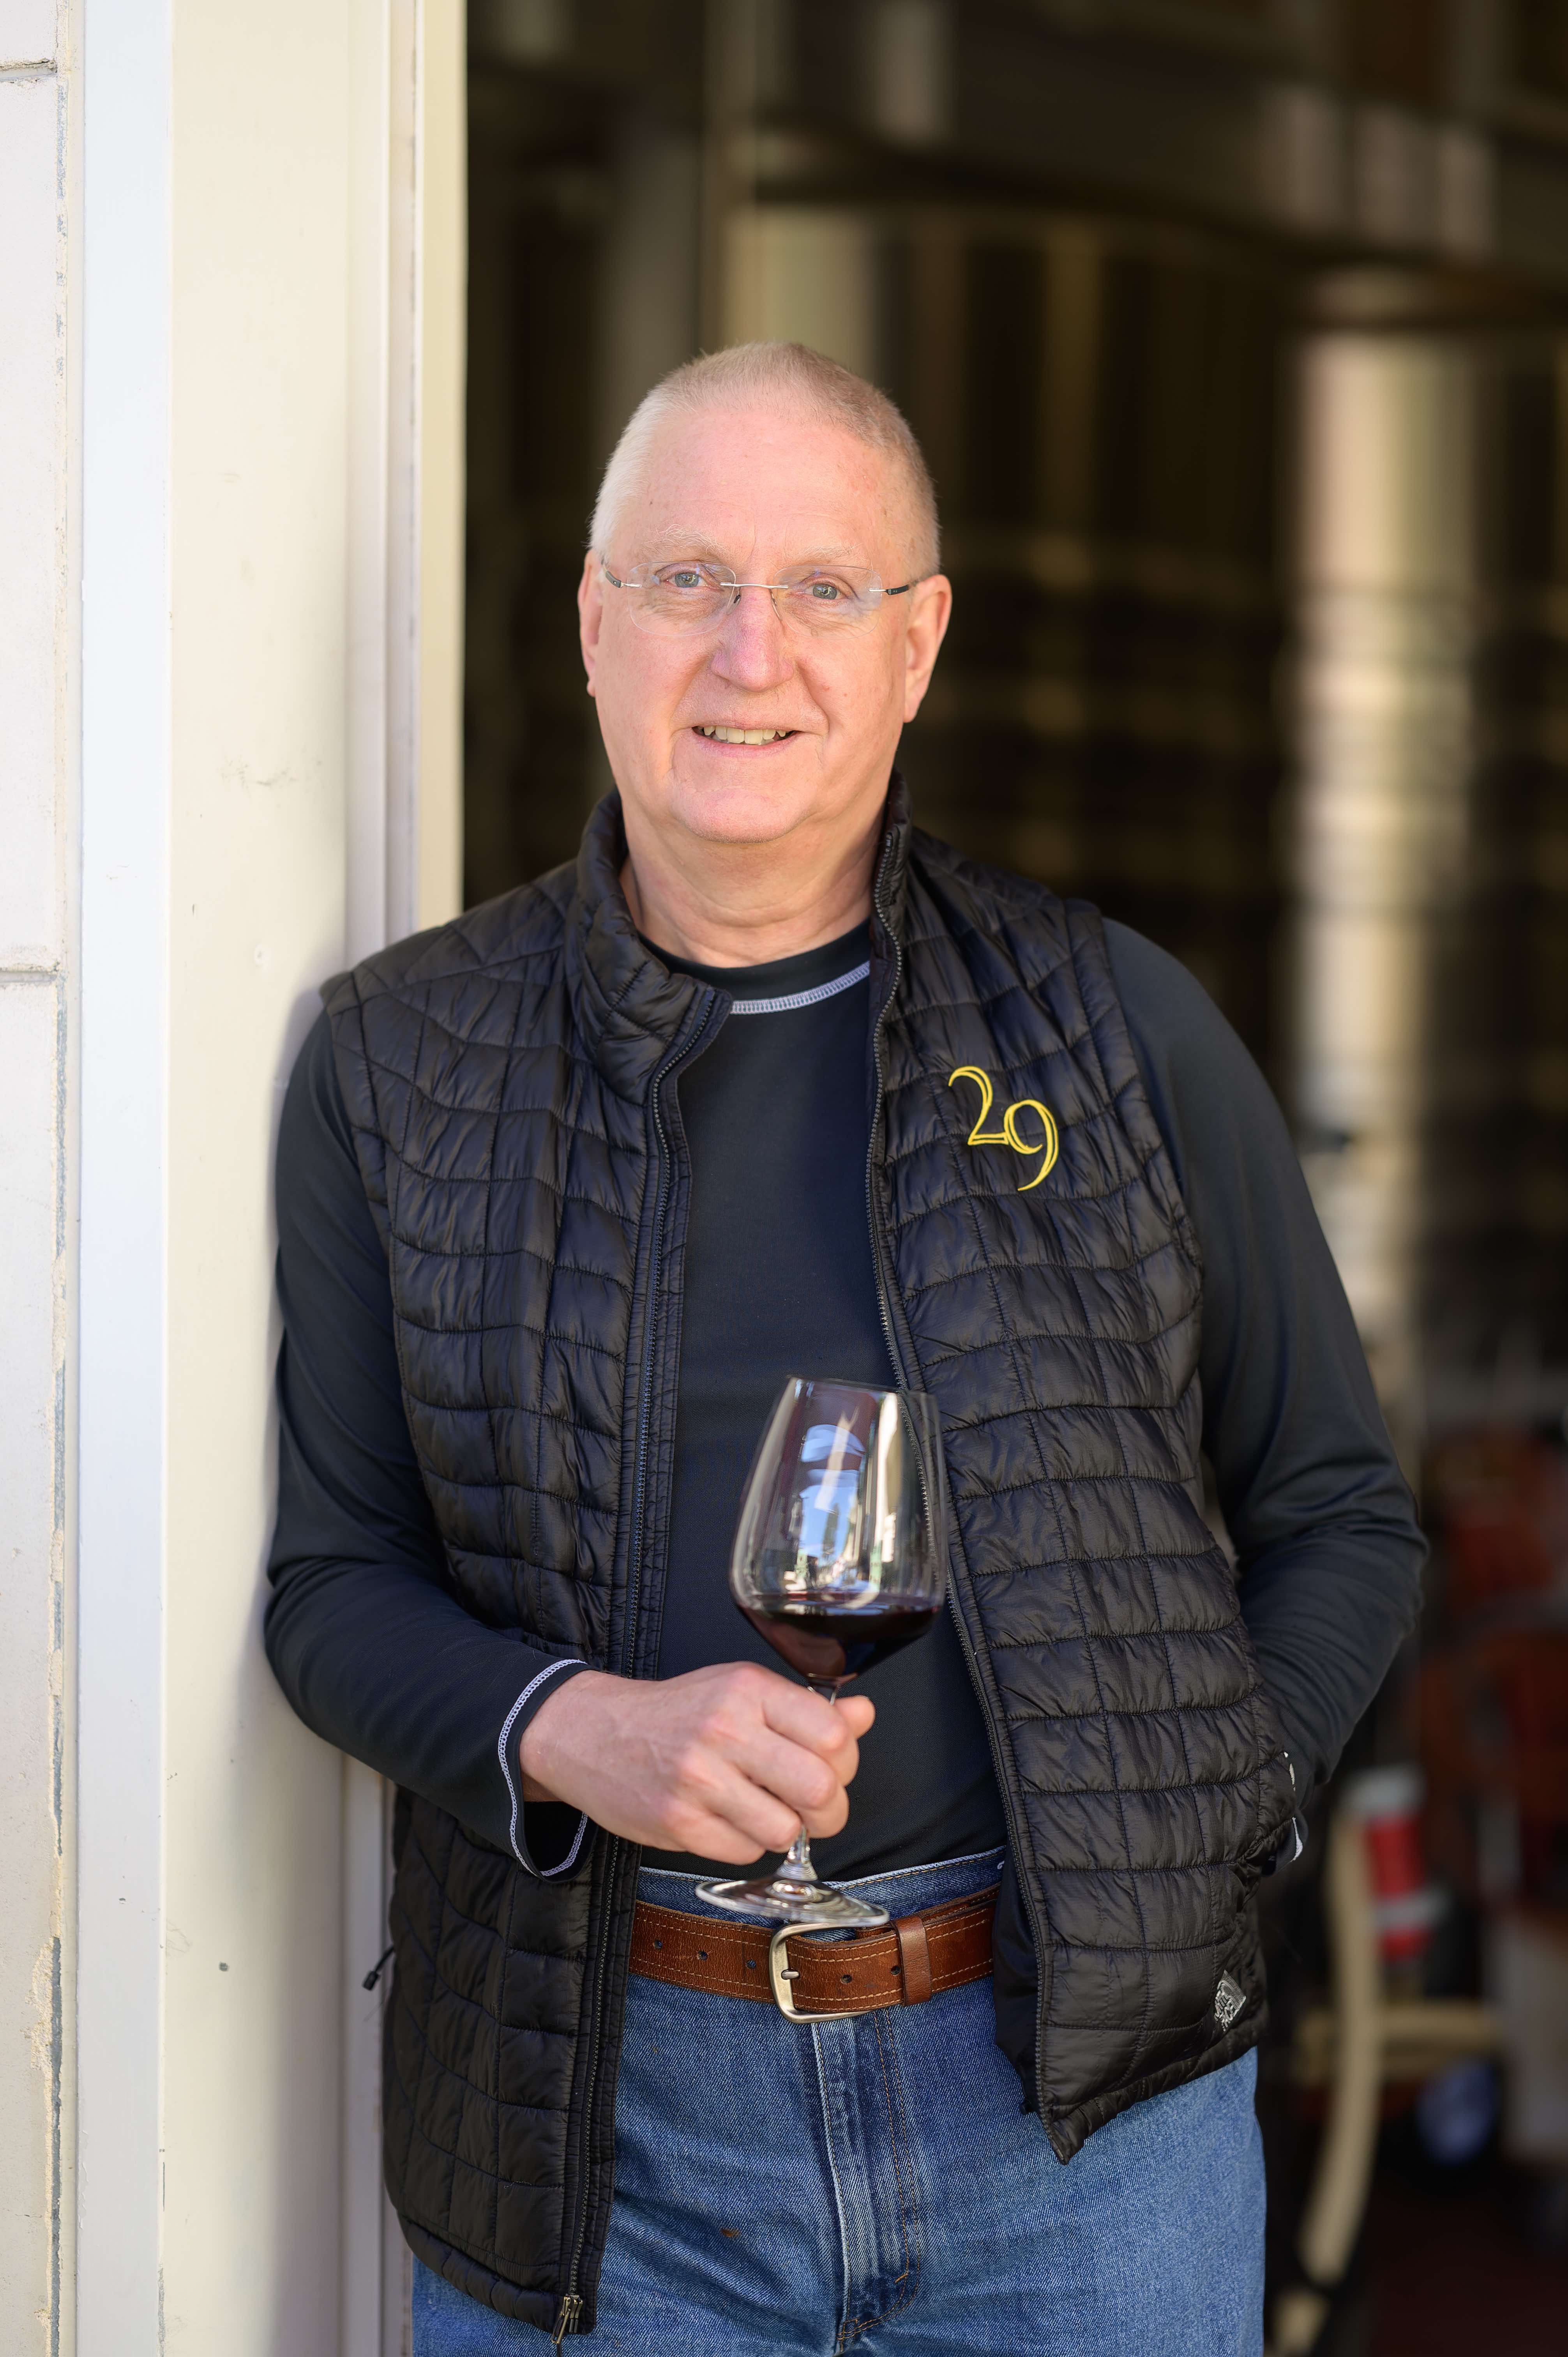 After more than 20 years leading premium Napa Valley Cabernet Sauvignon producer Vineyard 29, Chuck McMinn announces retirement.